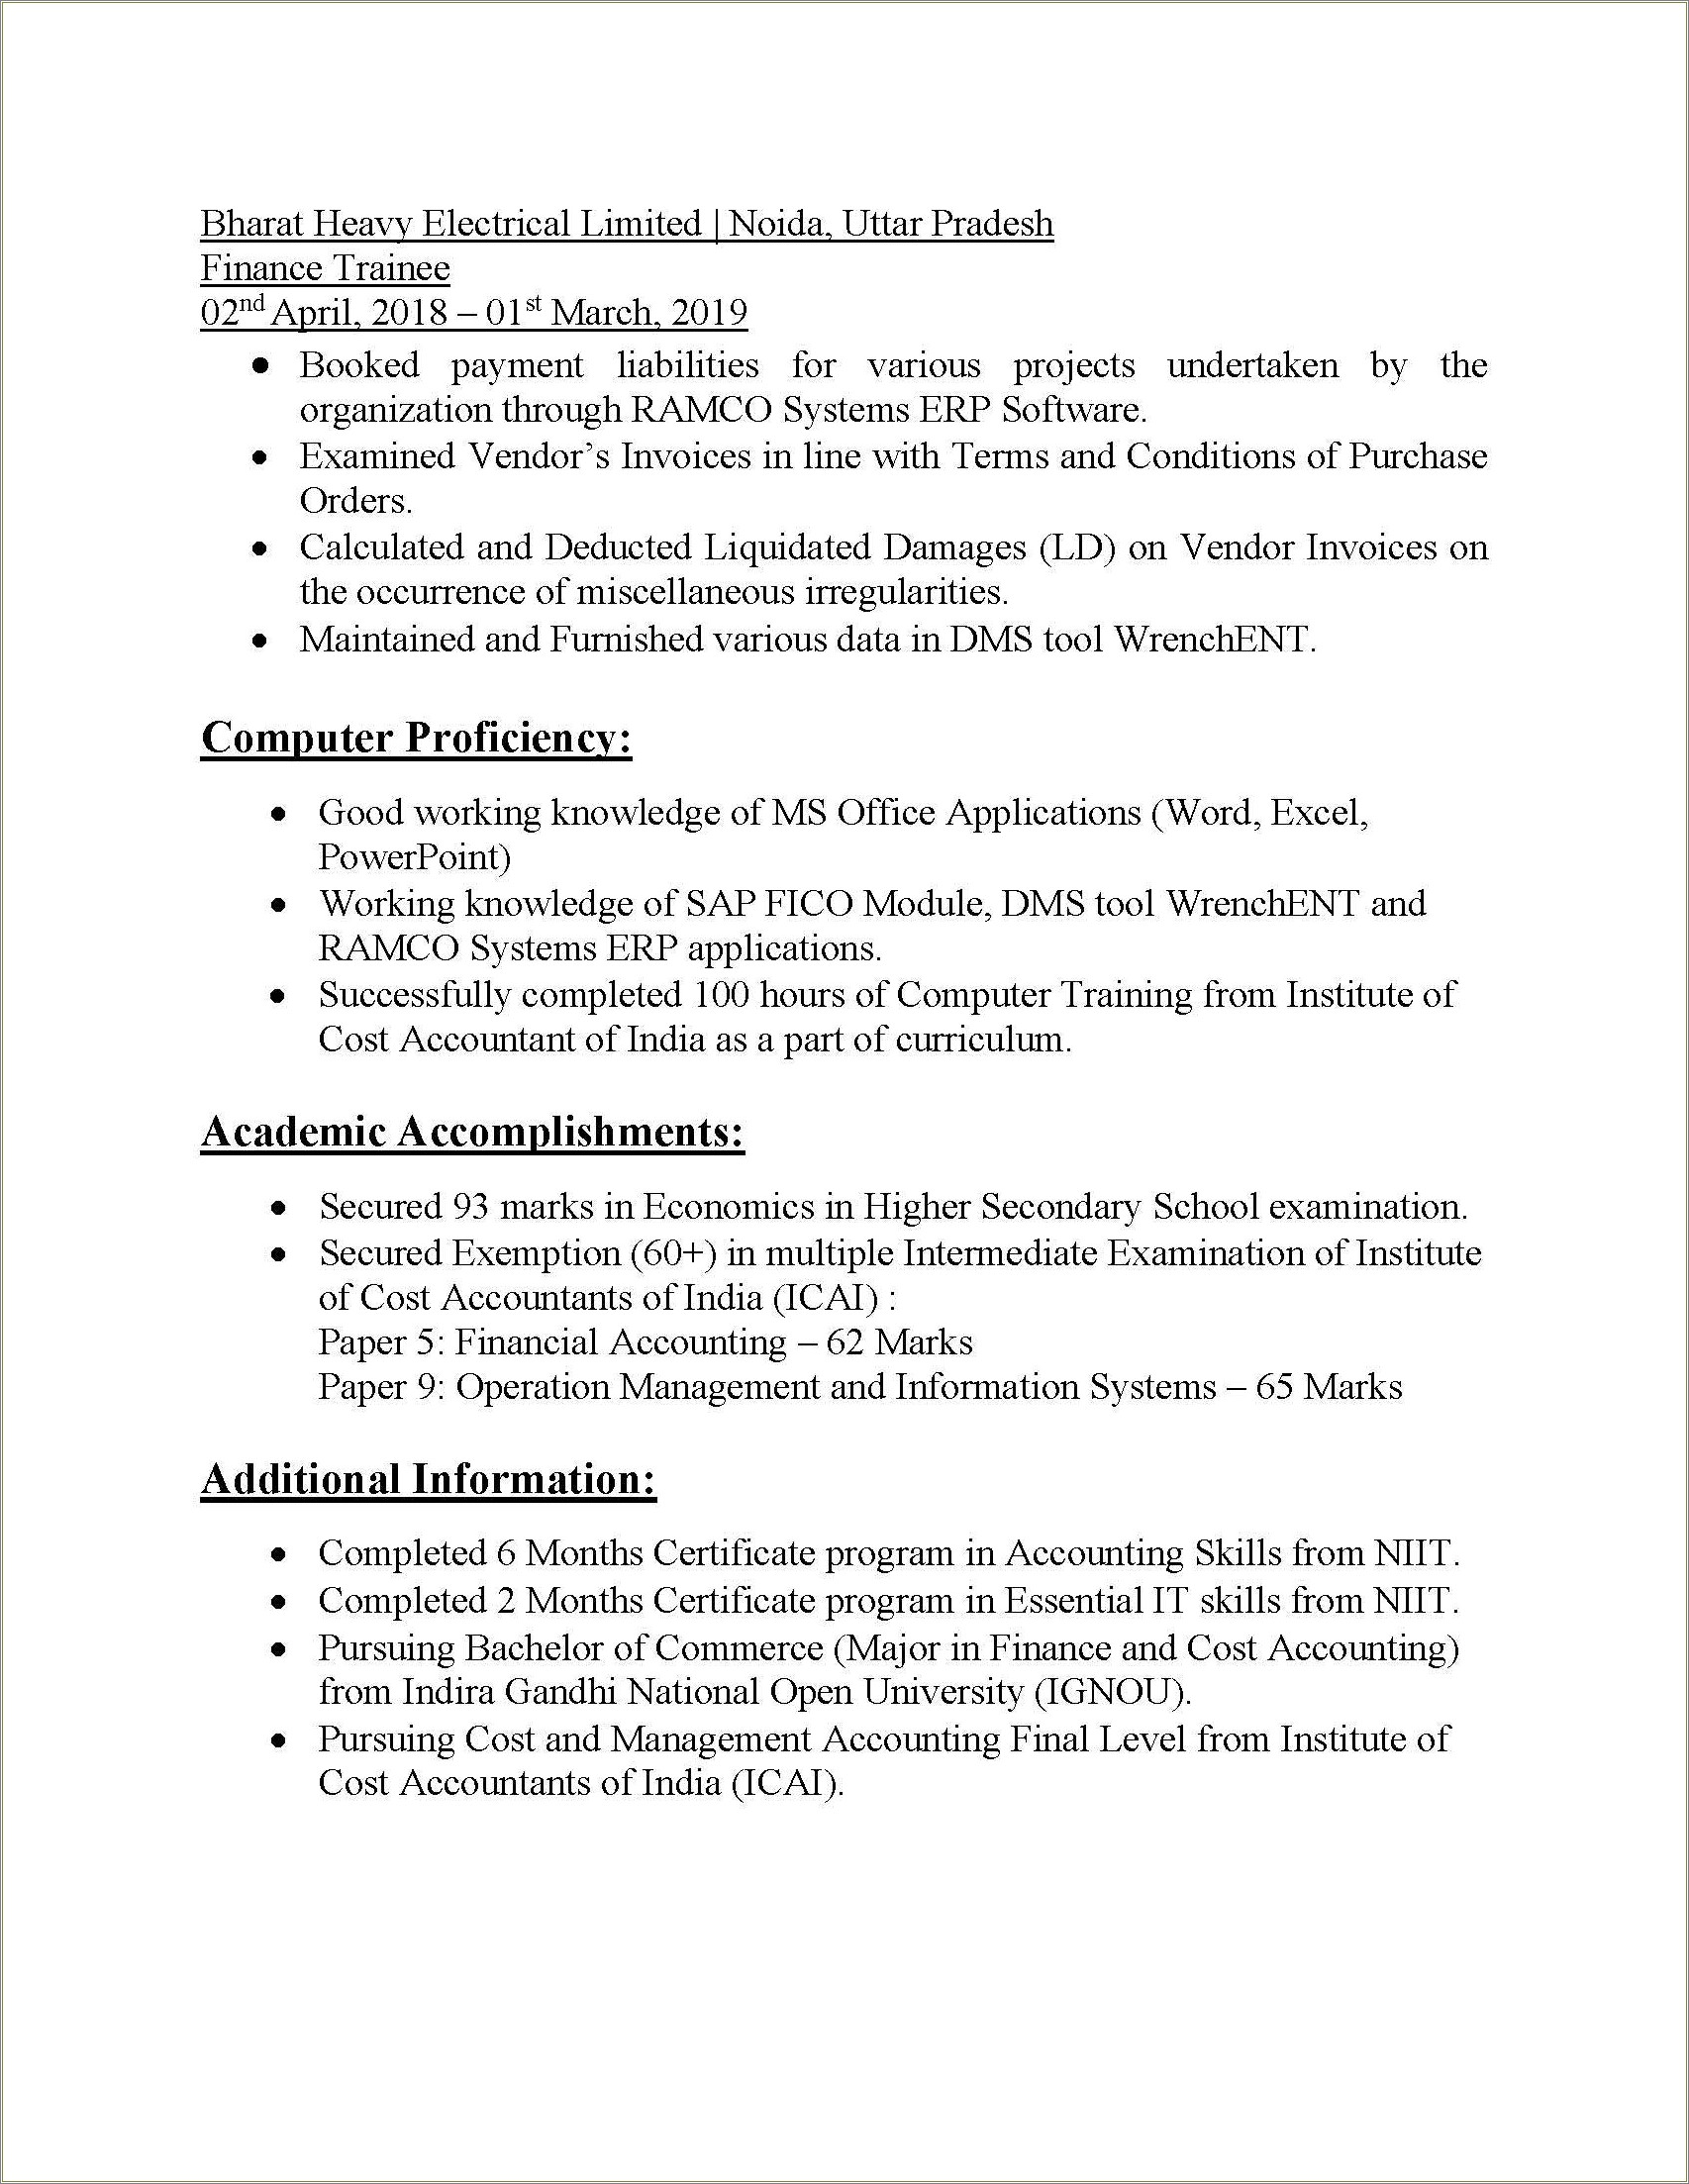 Putting Knowledgeable And Proficient On Resume